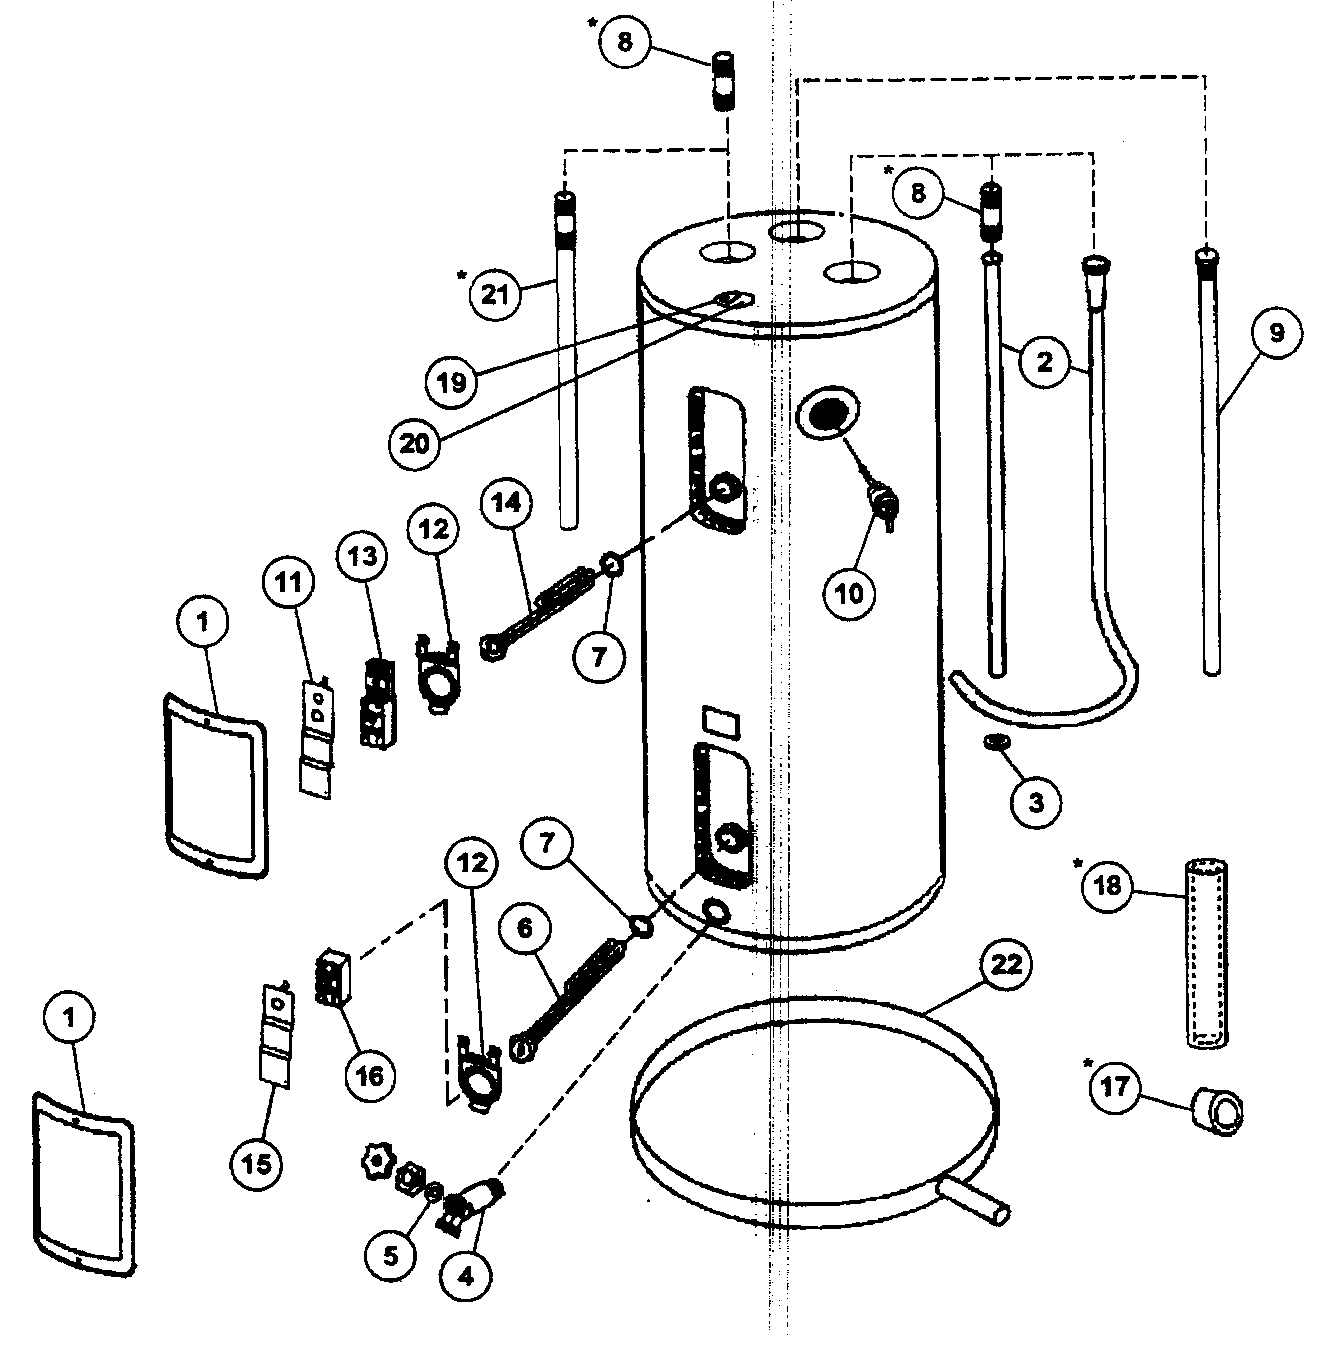 Heating Element Wiring Diagram For A.o. Water Heater from c.searspartsdirect.com